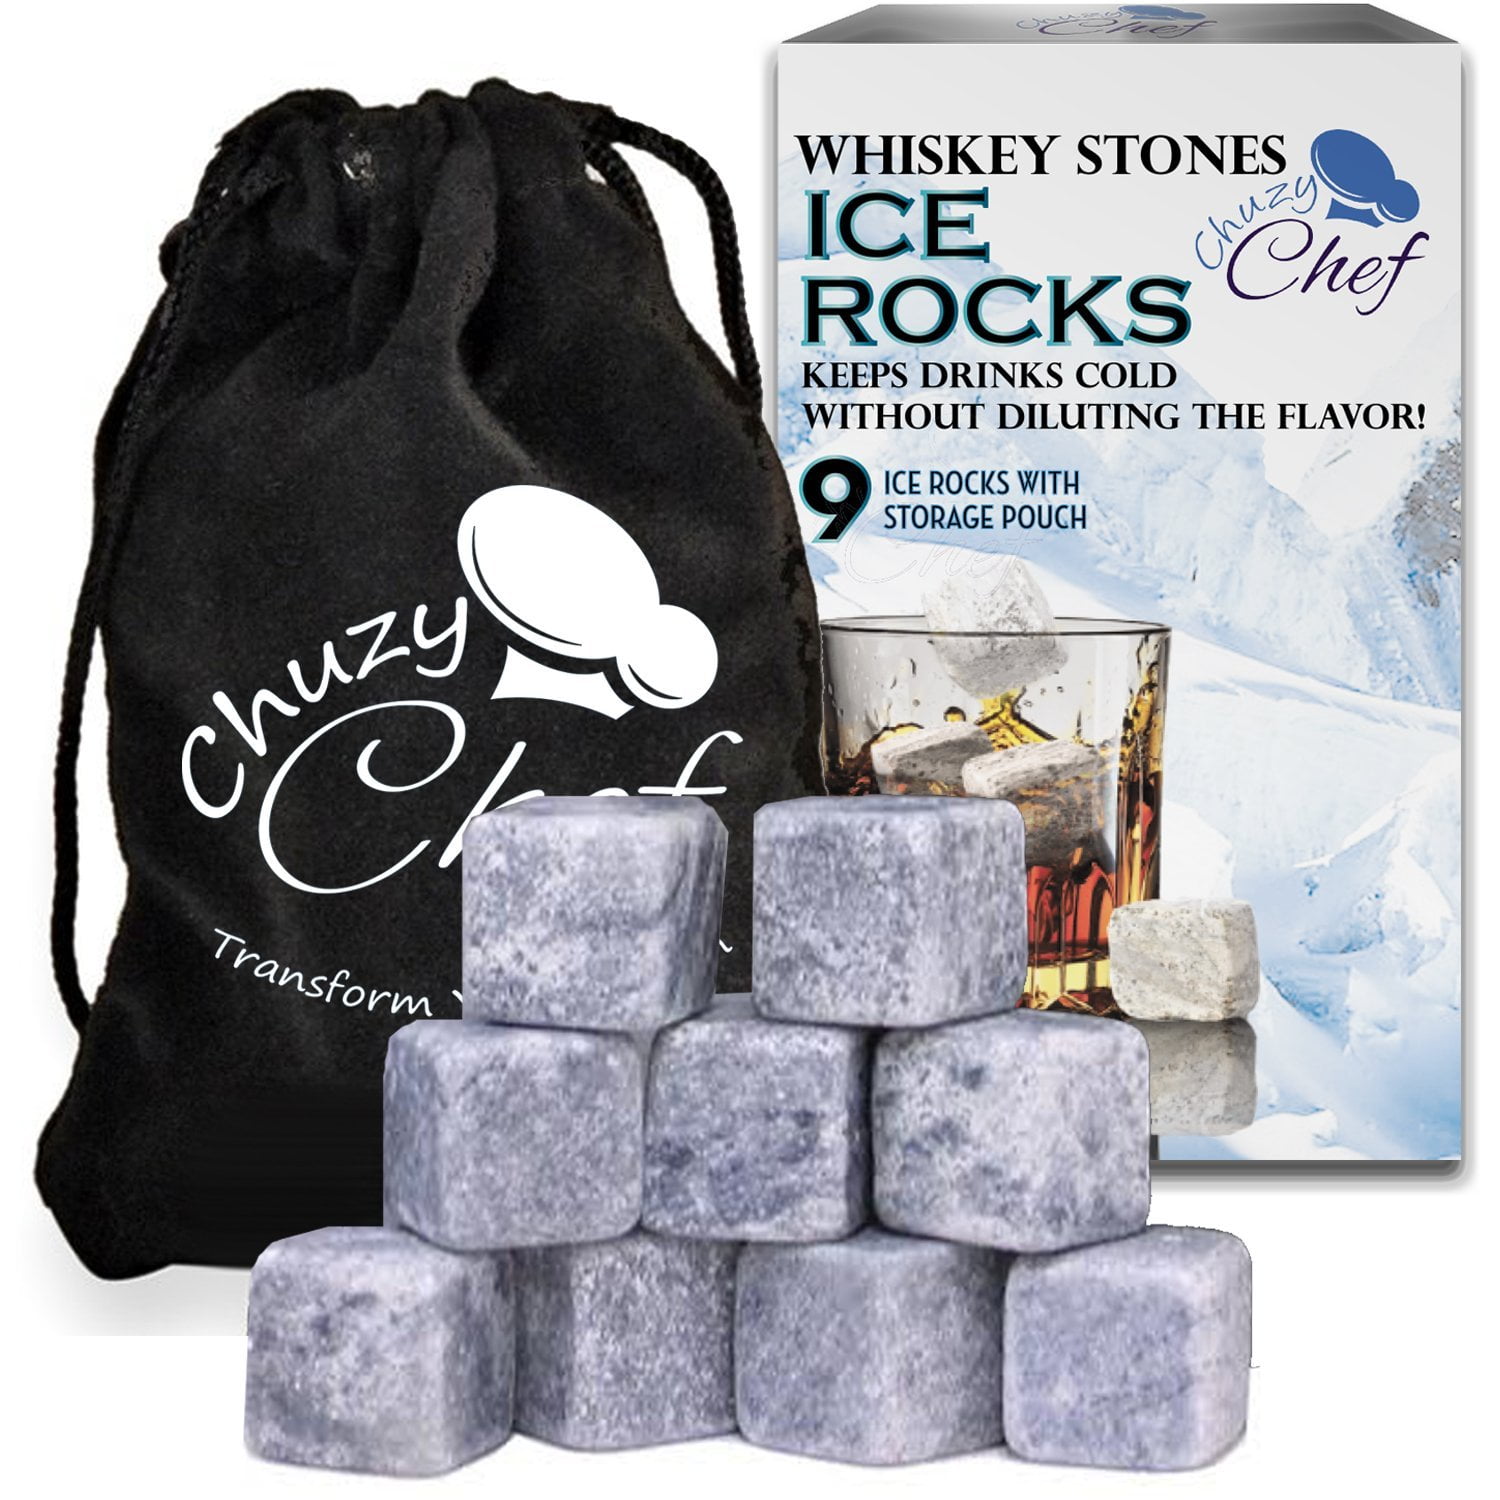 Whisky Sipping Stones SOAPSTONE 9 ICE Cubes & Velvet Pouch New BOXED Best GIFT